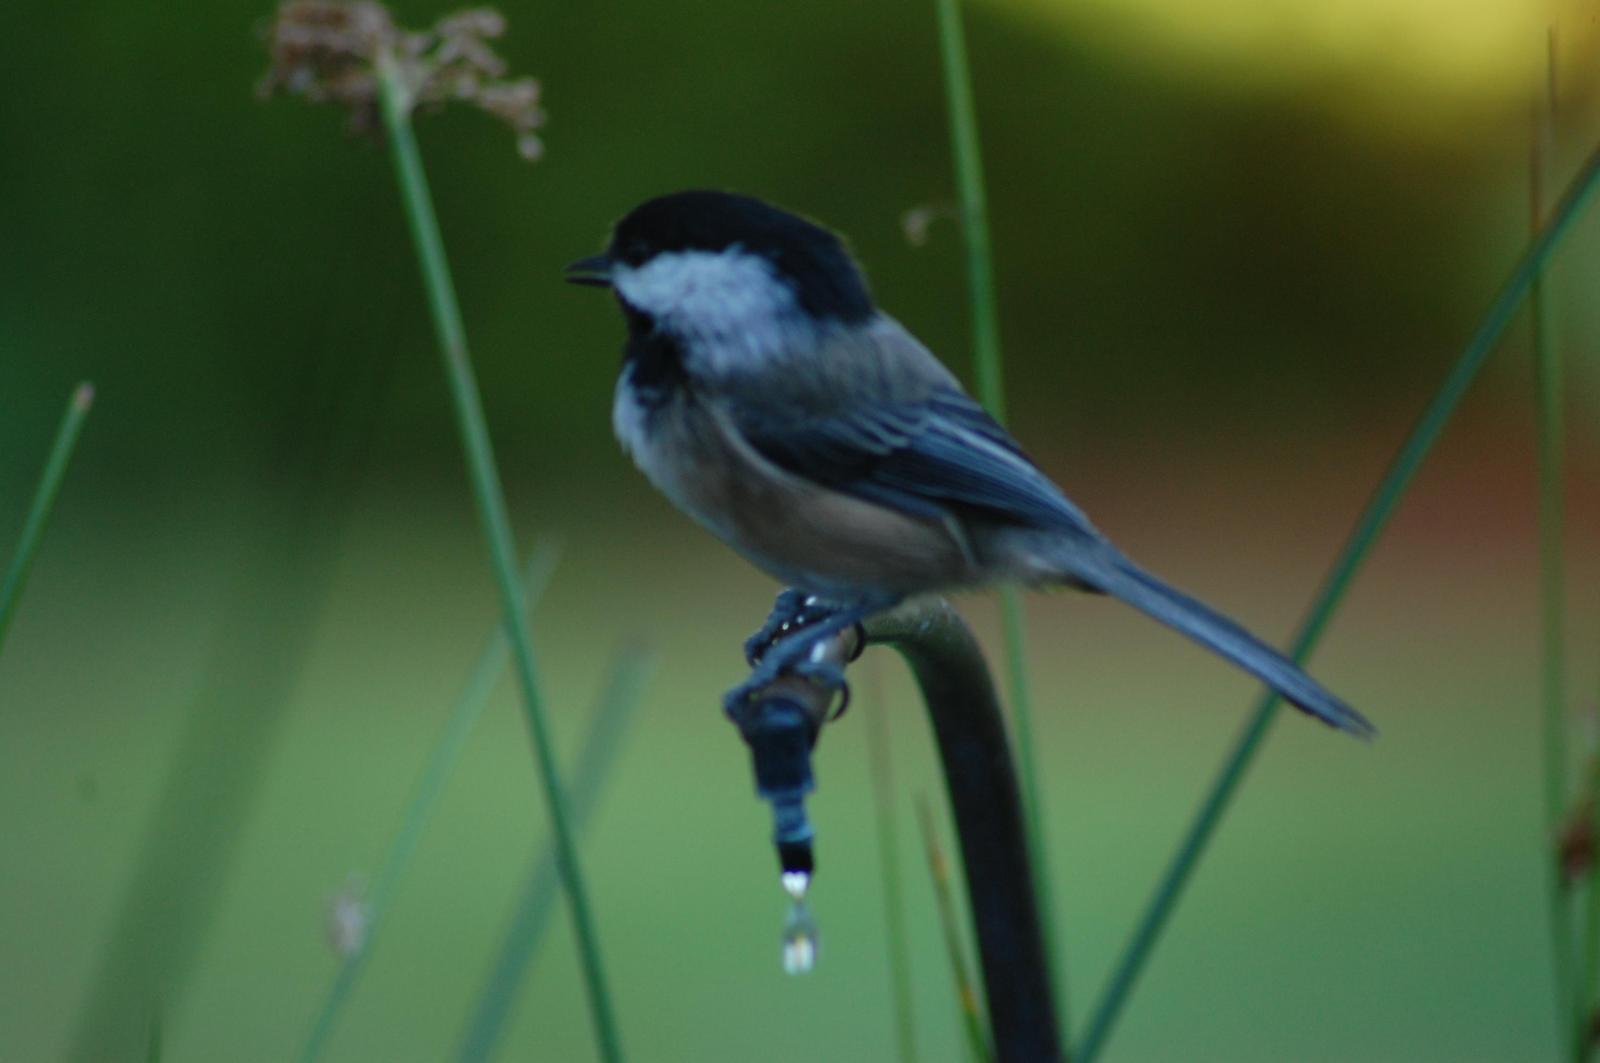 Black-capped Chickadee Photo by Ted Goshulak